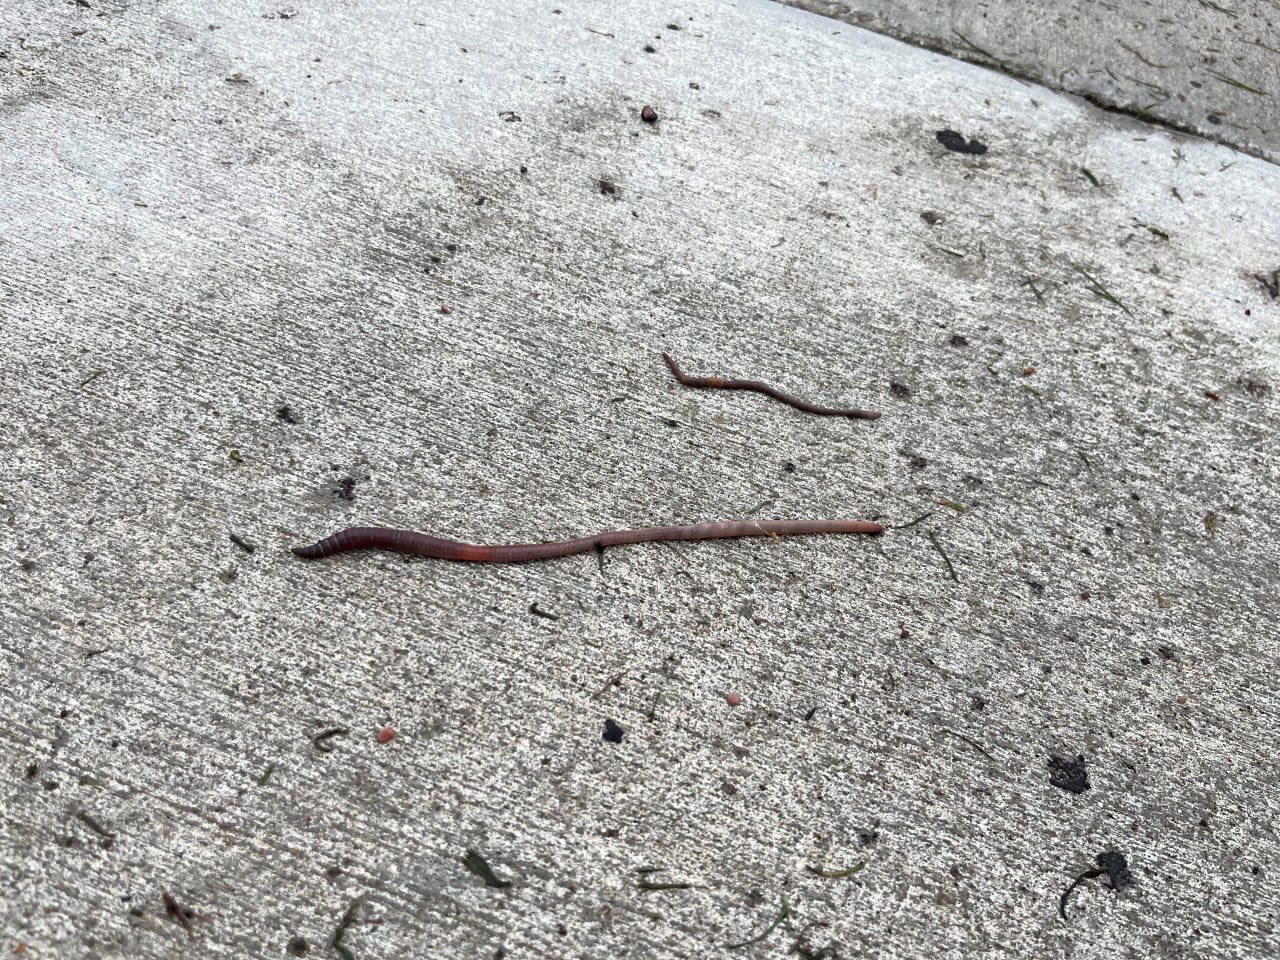 Why are there so many worms after it rains?